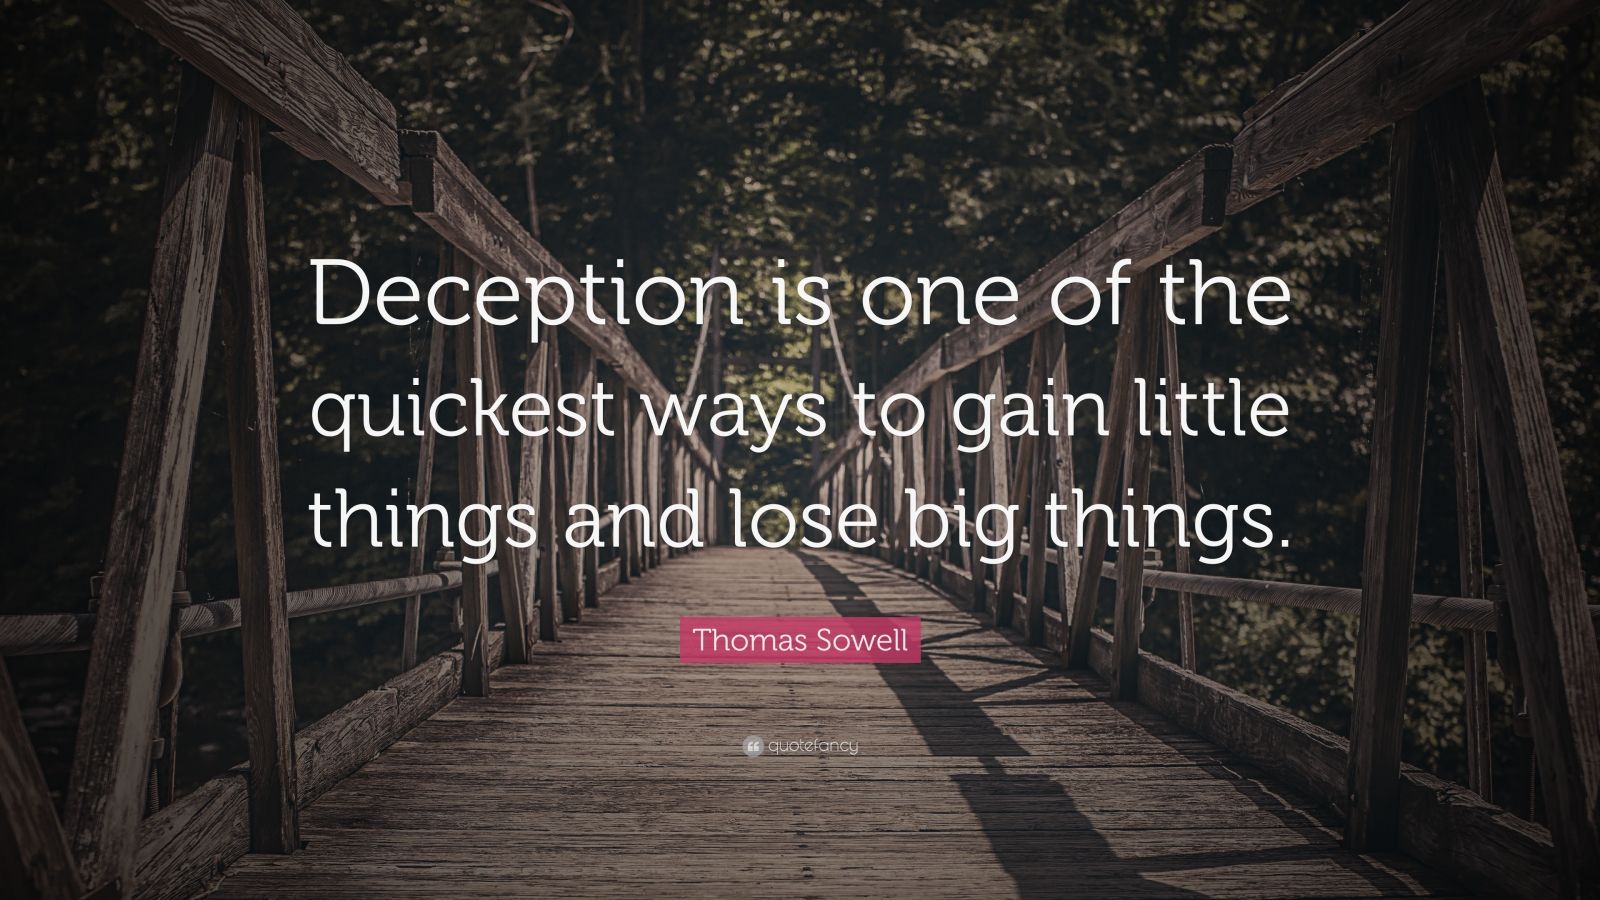 Thomas Sowell Quote “deception Is One Of The Quickest Ways To Gain Little Things And Lose Big 7173